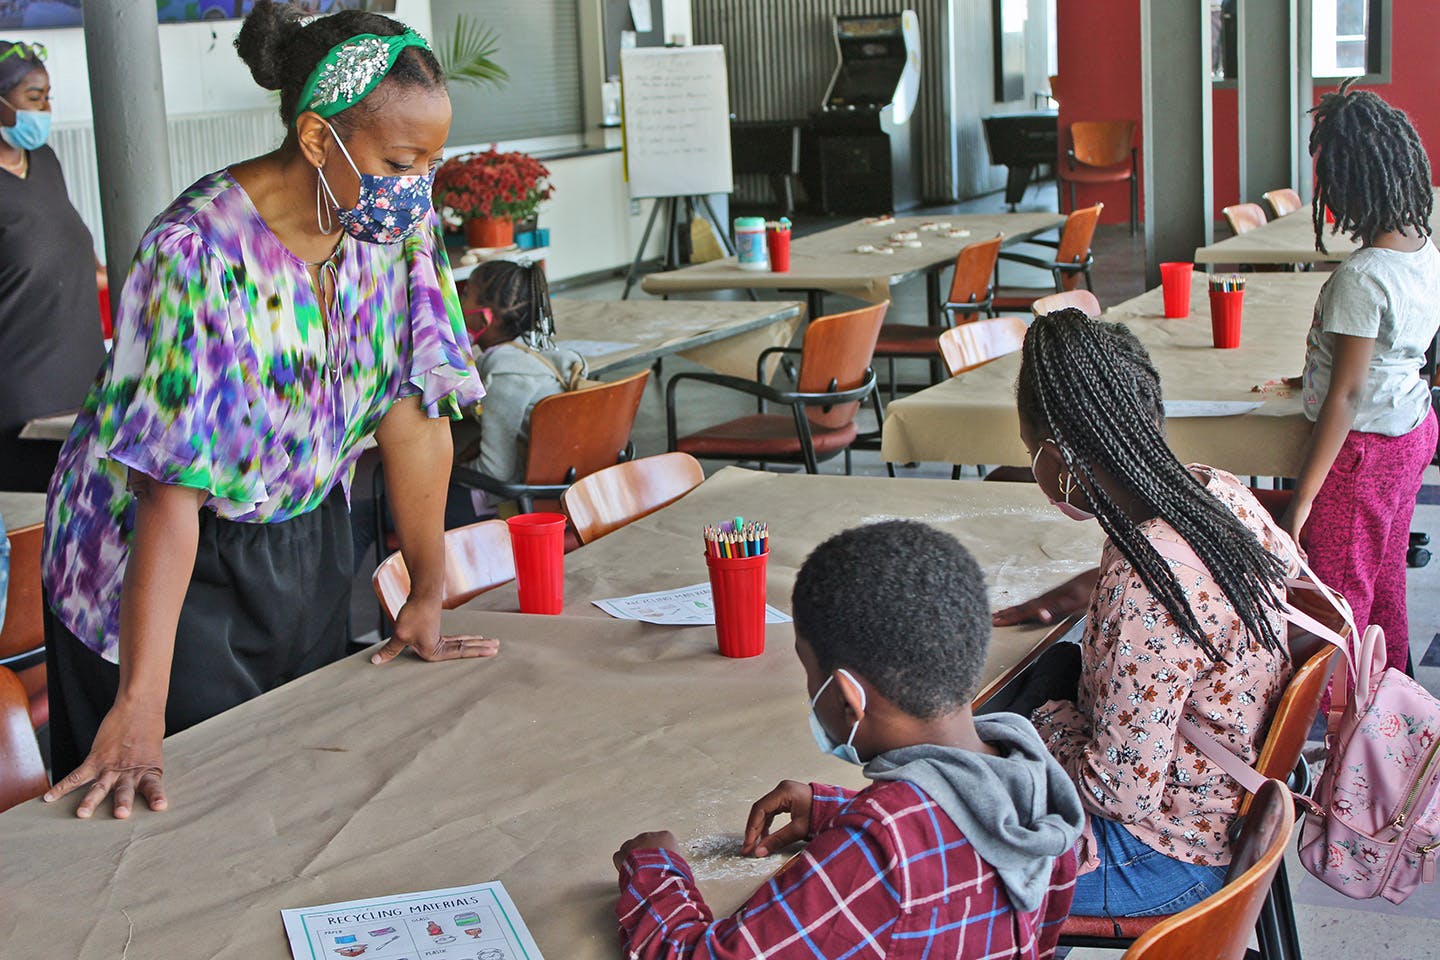 Reese standing over a table teaching three young adults in her free art class, all of them masked.